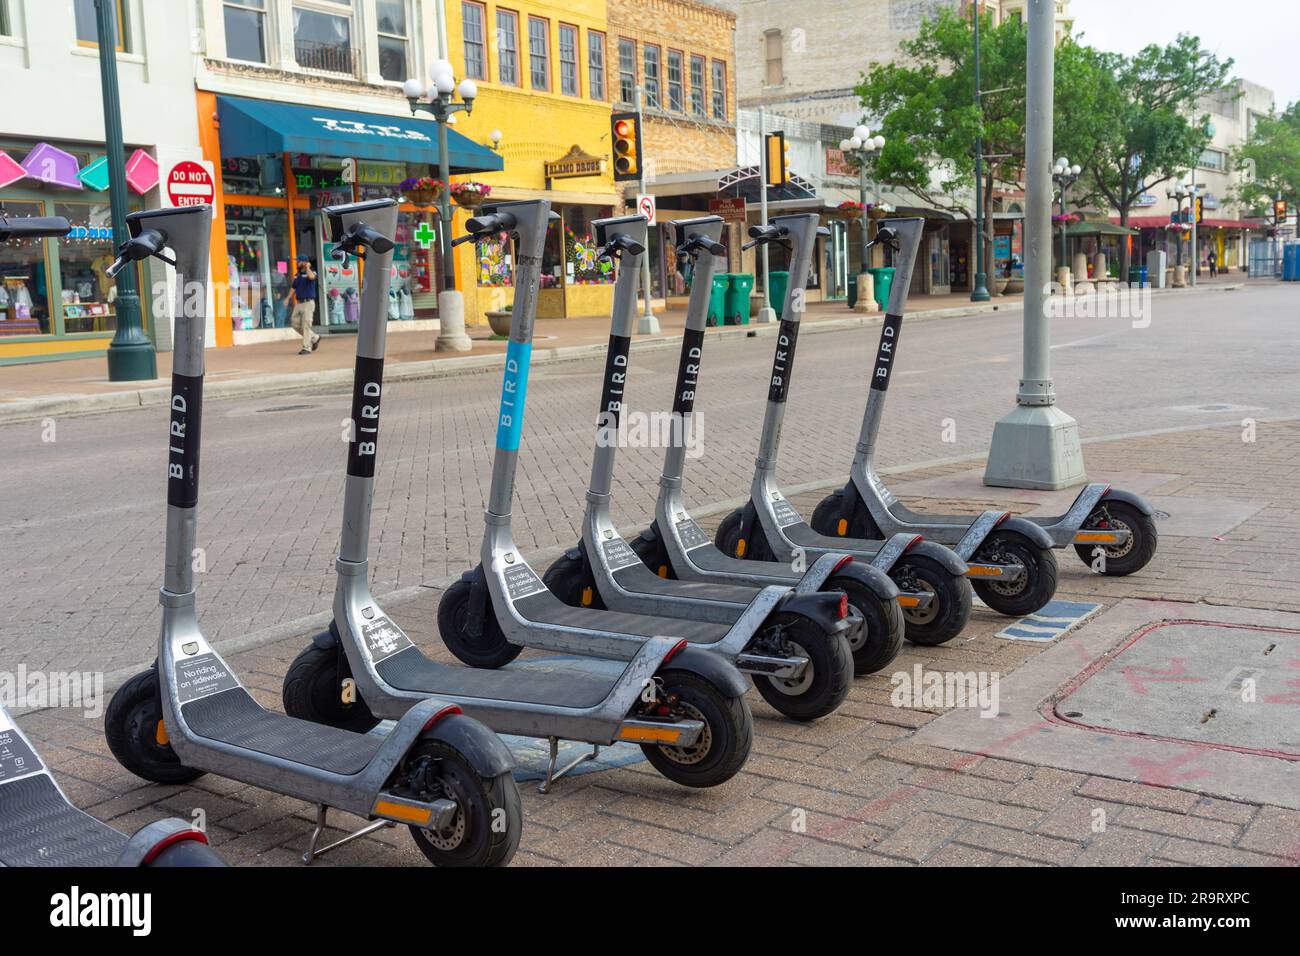 San Antonio, Texas, USA – May 8, 2023: A row of Bird electric ride share scooters parked on a sidewalk in downtown San Antonio, Texas. Stock Photo